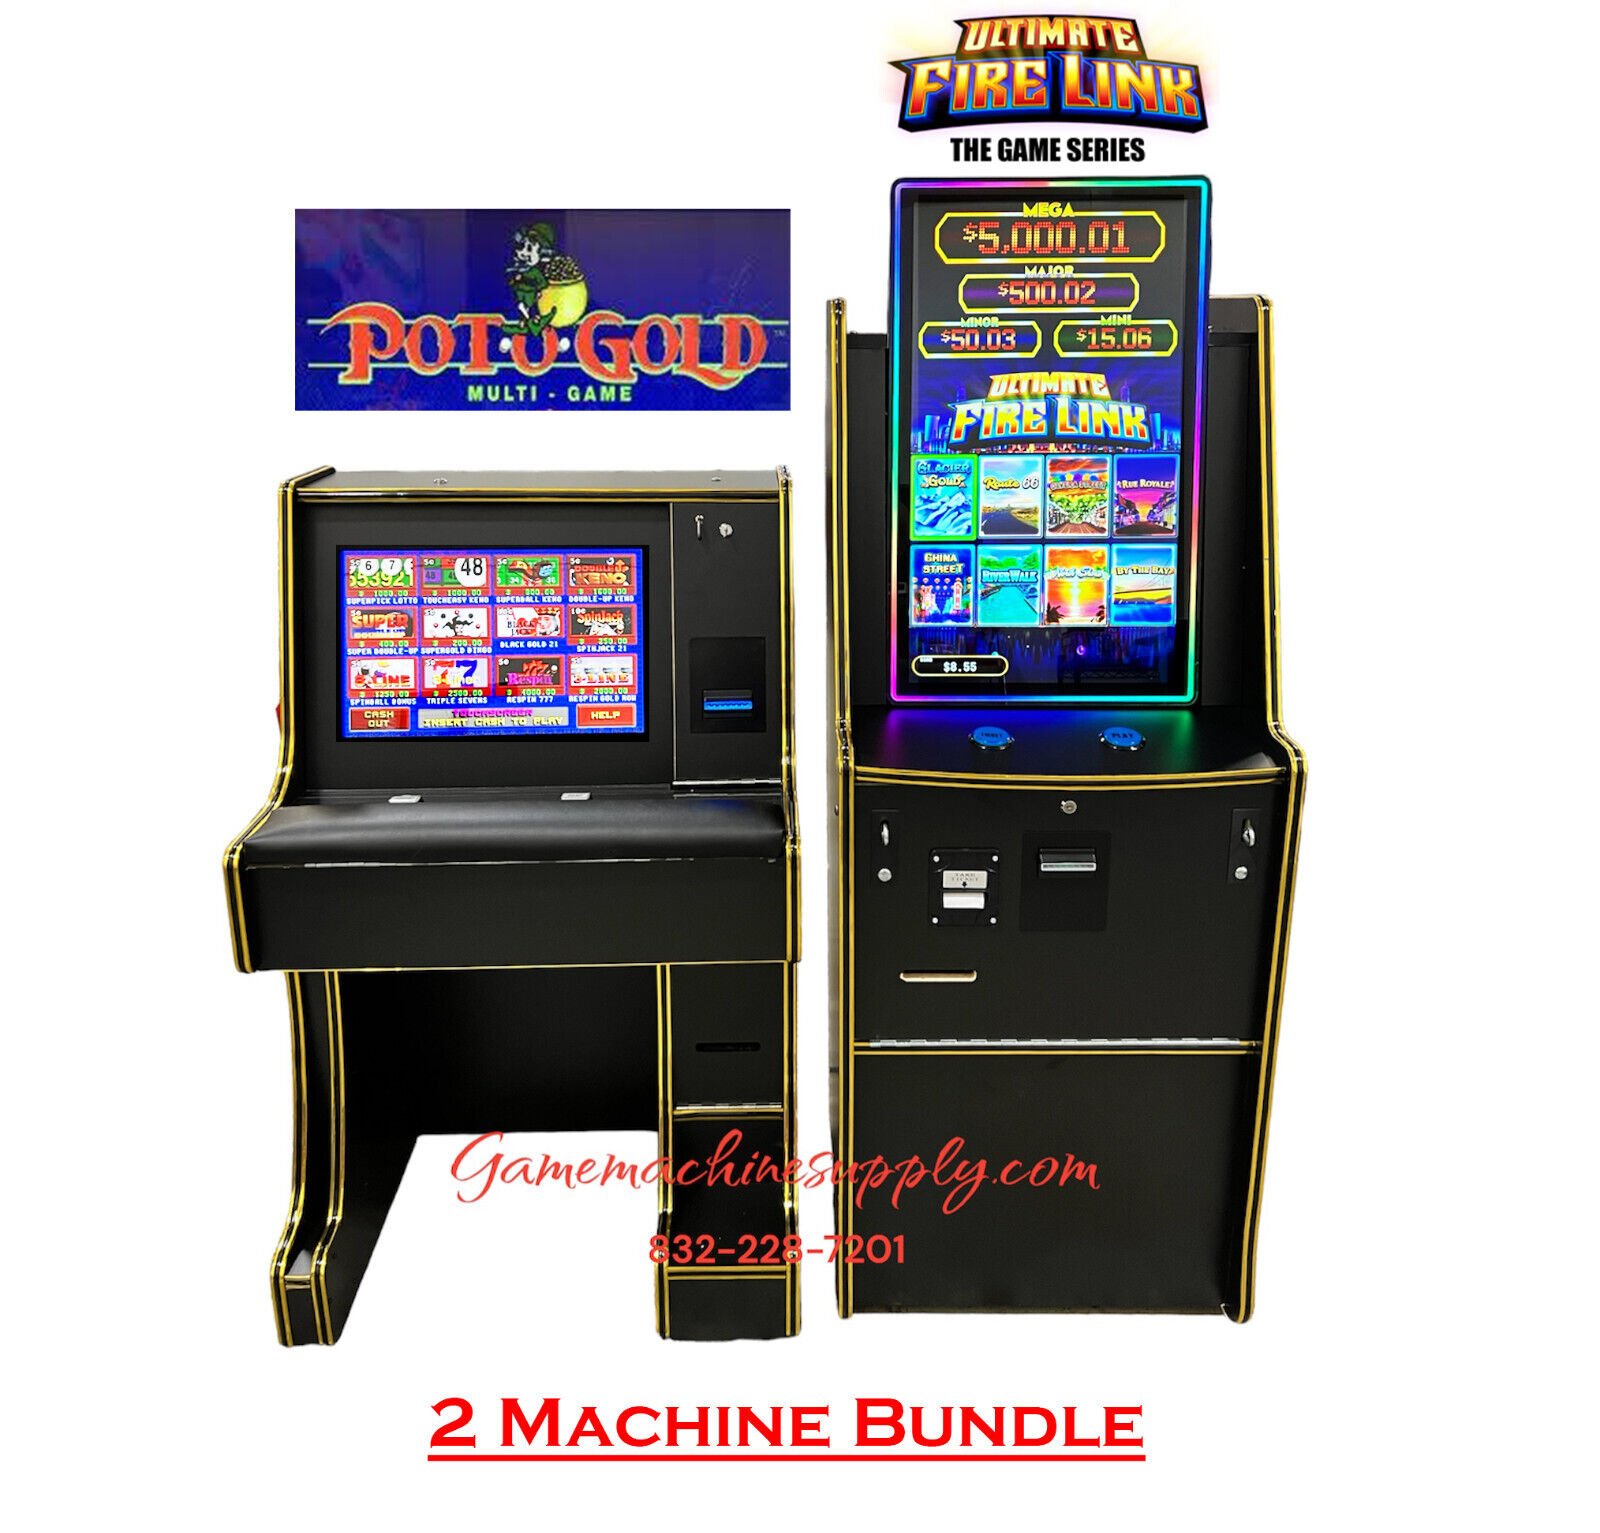 (Bundle Pack) Pot O Gold & Firelink Upgraded with $100 Bill Acceptors & Printers